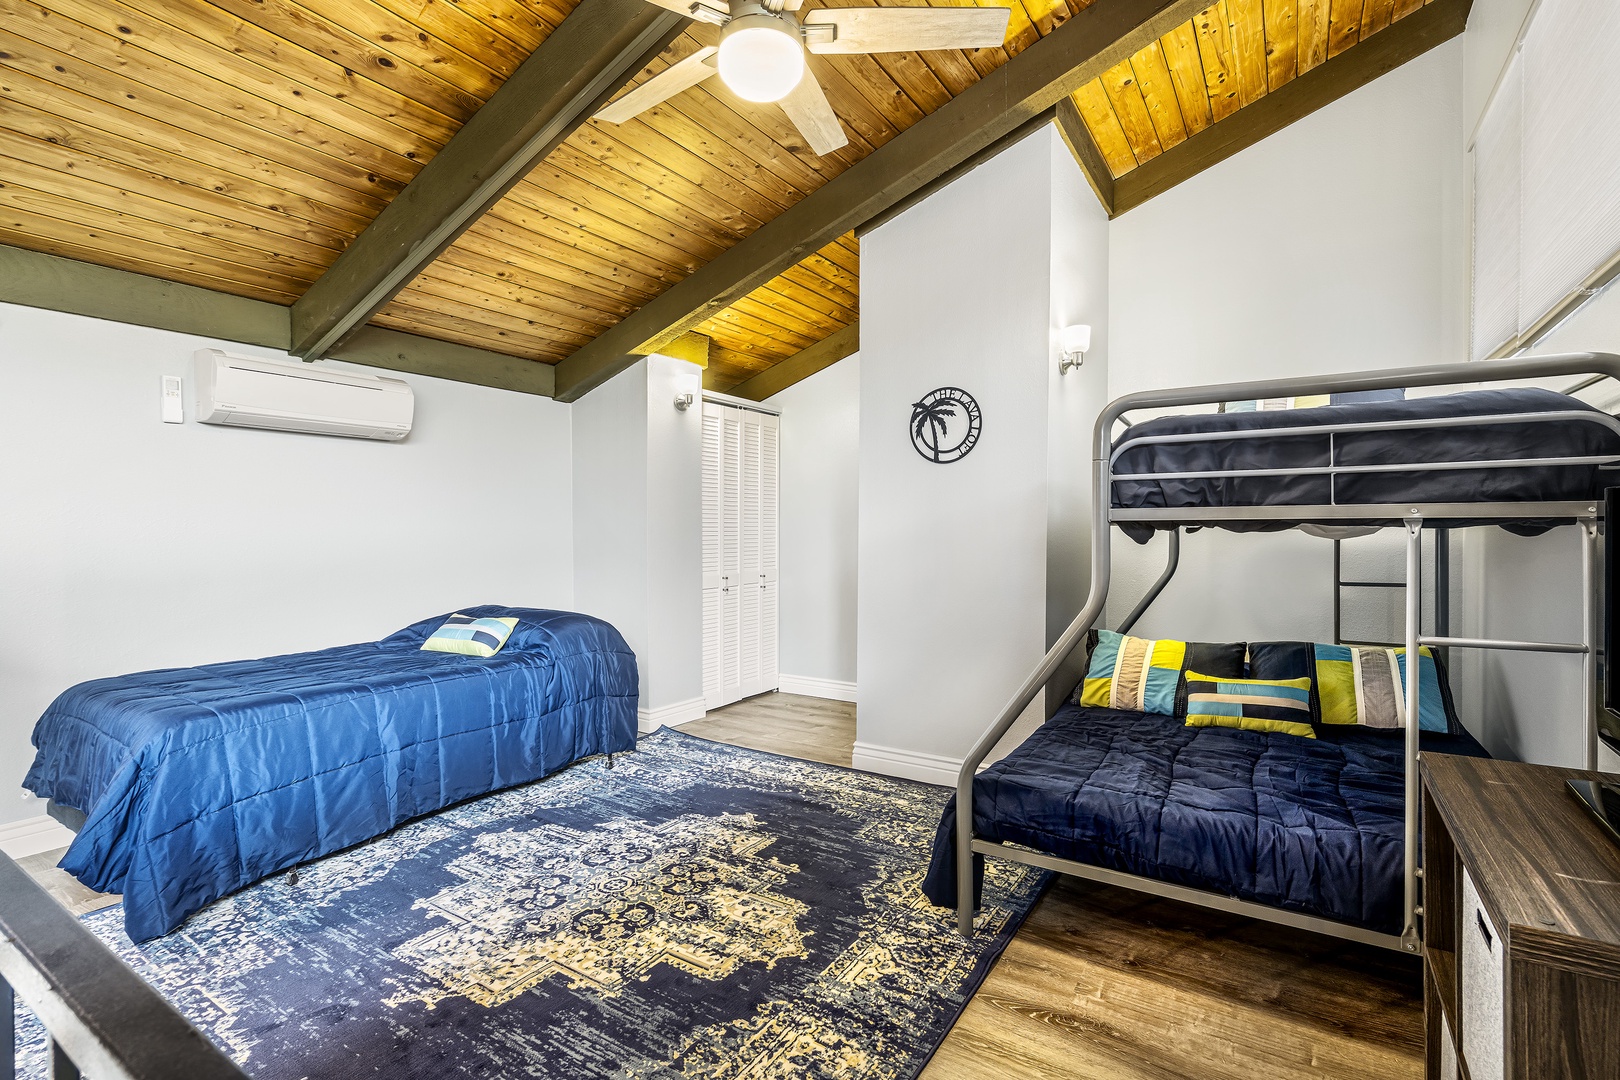 Kailua Kona Vacation Rentals, Keauhou Kona Surf & Racquet 9303 - Upstairs loft featuring extra sleeping space between the 2 Twin beds and 1 Double bed